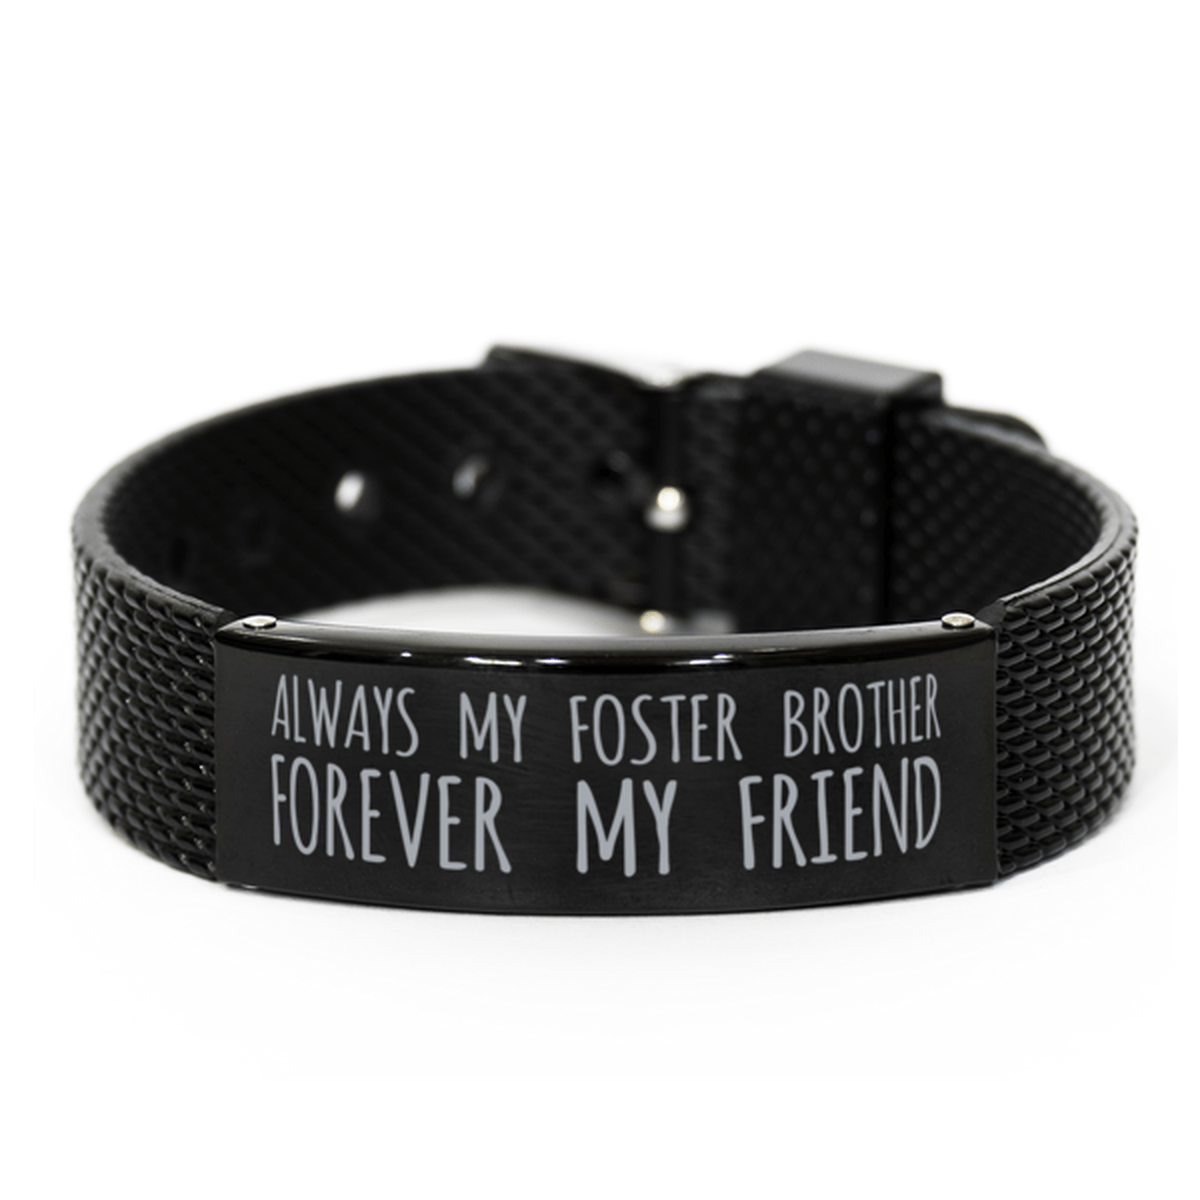 Inspirational Foster Brother Black Shark Mesh Bracelet, Always My Foster Brother Forever My Friend, Best Birthday Gifts for Family Friends